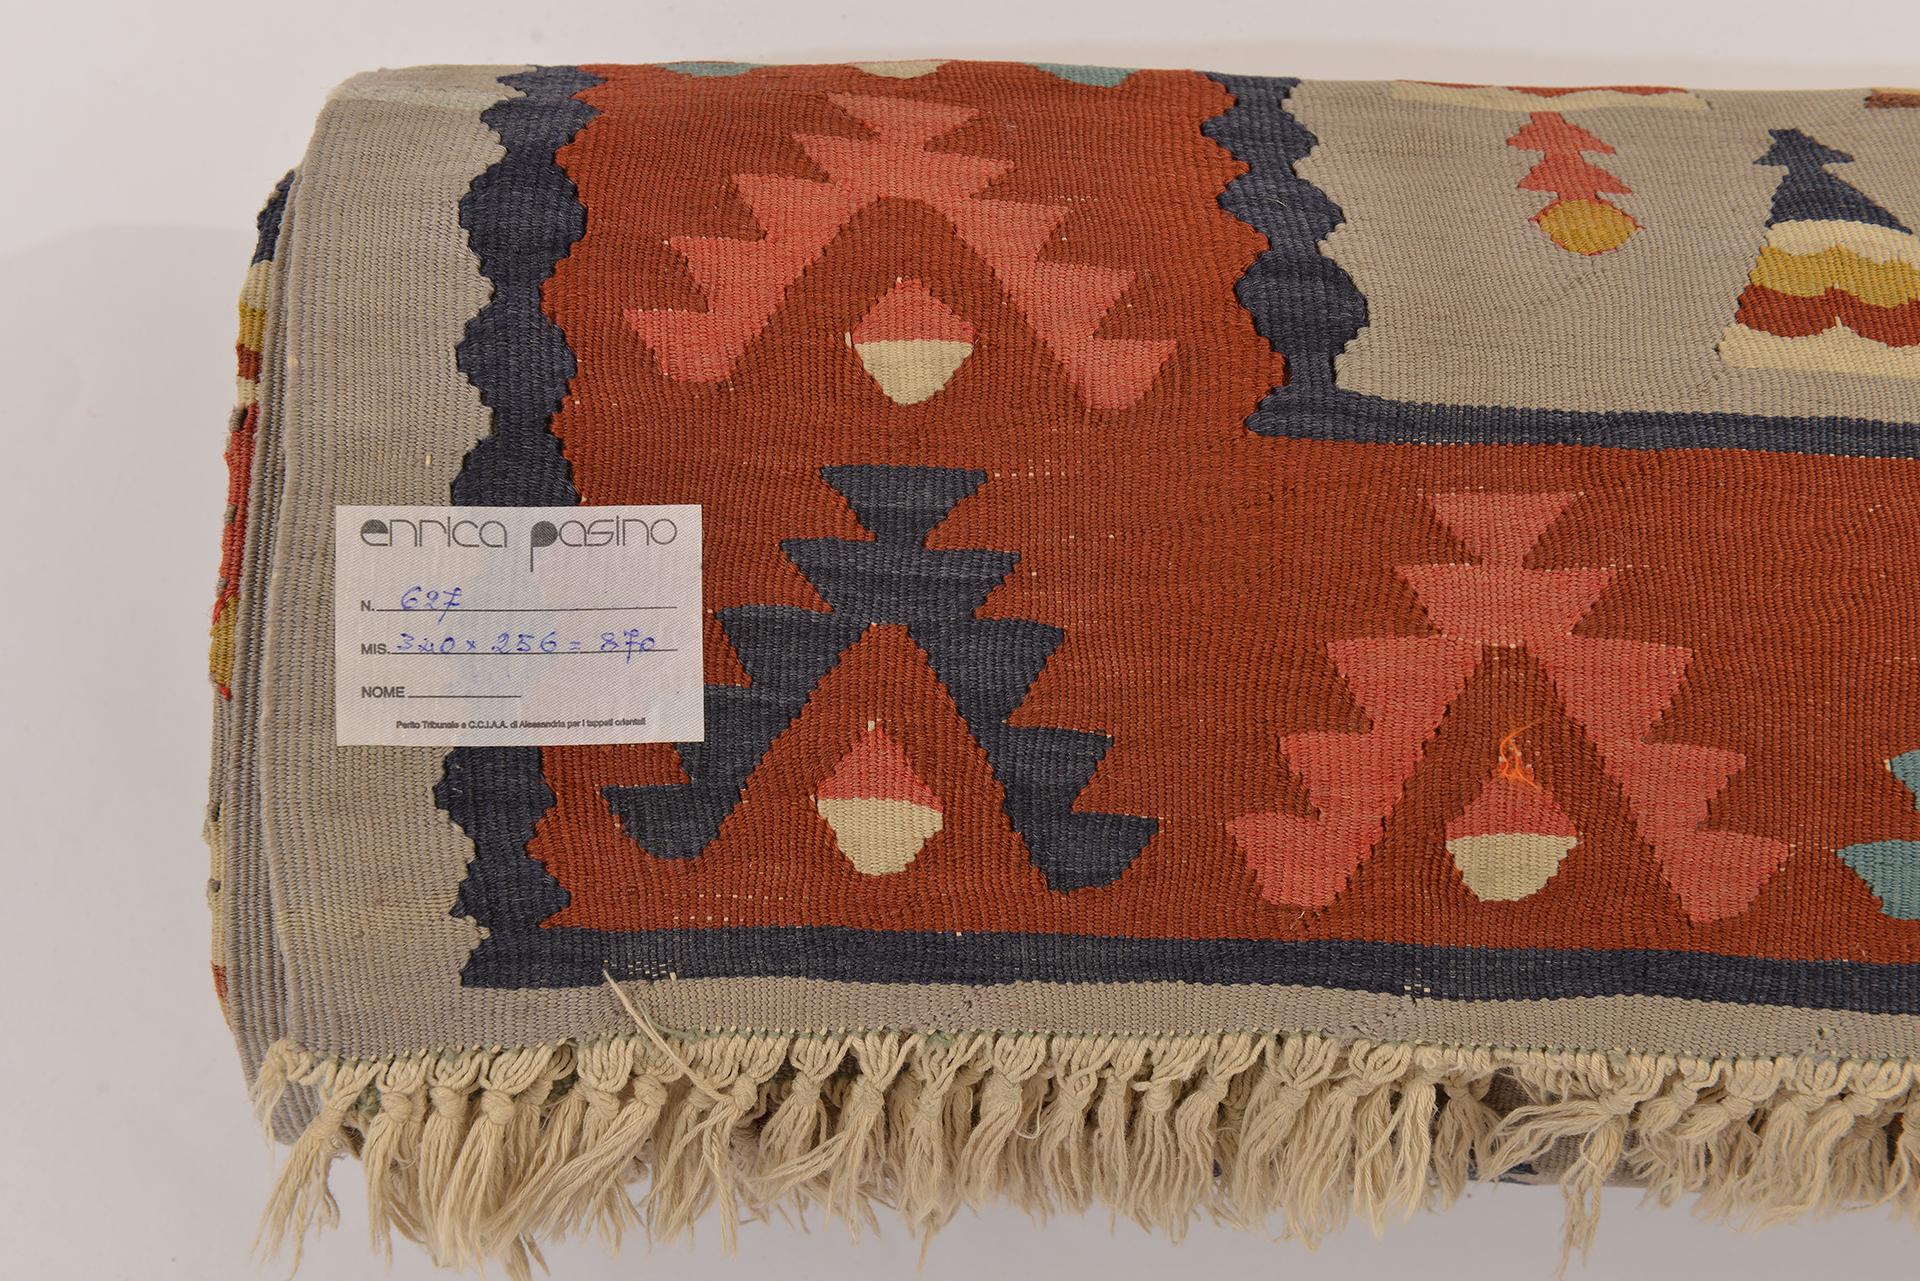 nr. 627 - Unusual elegant modern pattern for this large vintage Turkish kilim, rare model without medallion.  Perfect for modern settings.
Now with an interesting price for closing activities.